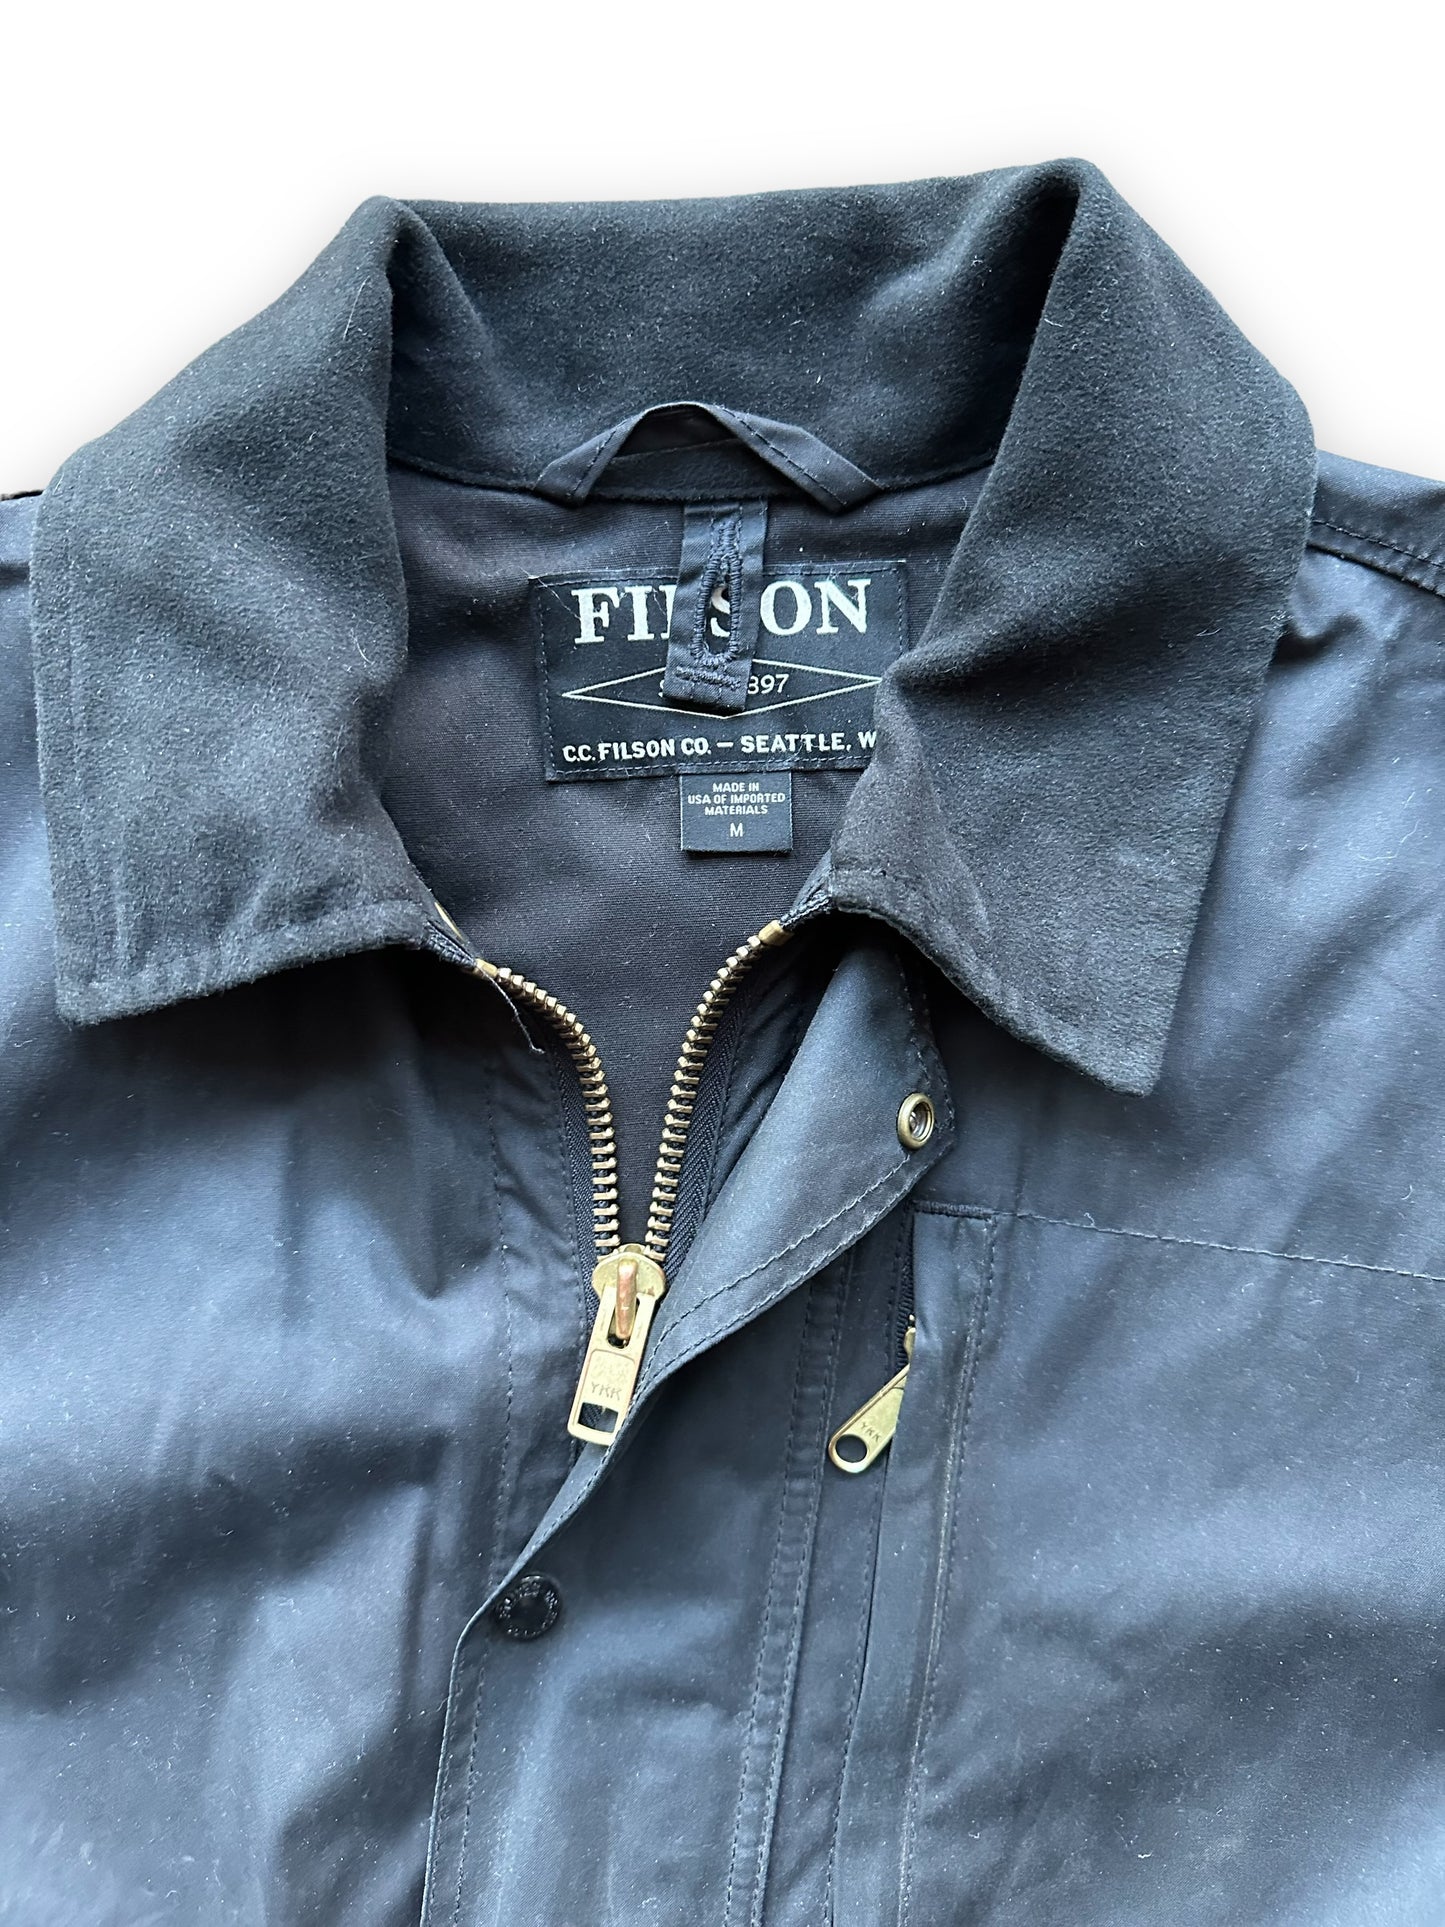 Tag View of Filson Black Cover Cloth Mile Marker Jacket With Hood SZ M |  Barn Owl Vintage Goods | Vintage Workwear Seattle